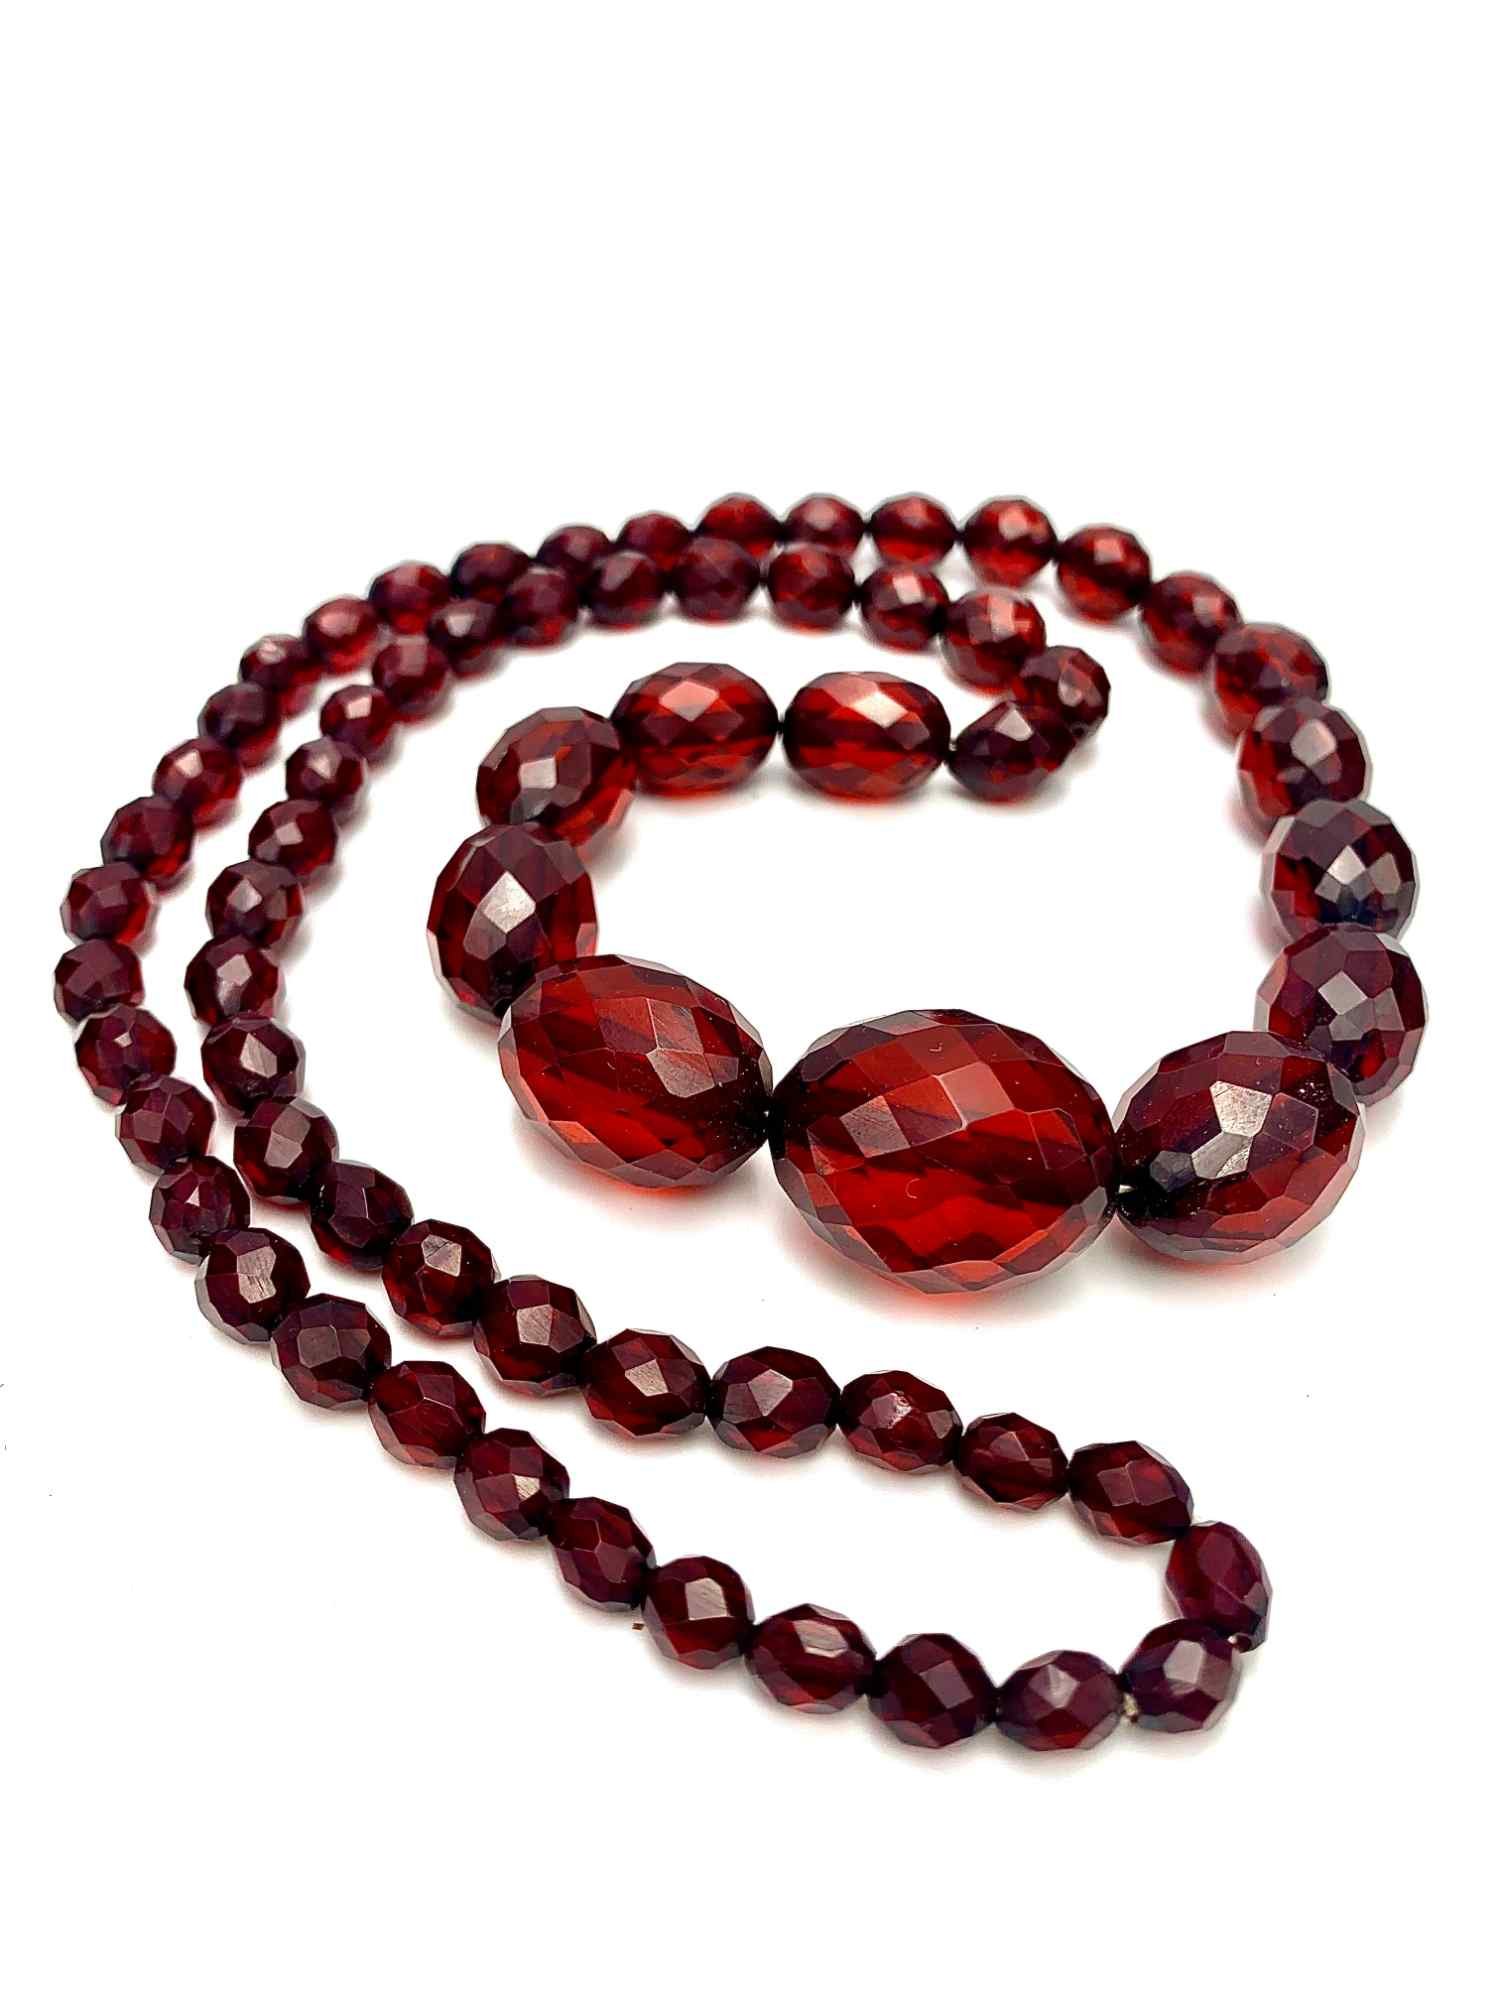 Sold at Auction: A CHERRY AMBER TYPE BEAD NECKLACE. 53 grams. 68 cm long.